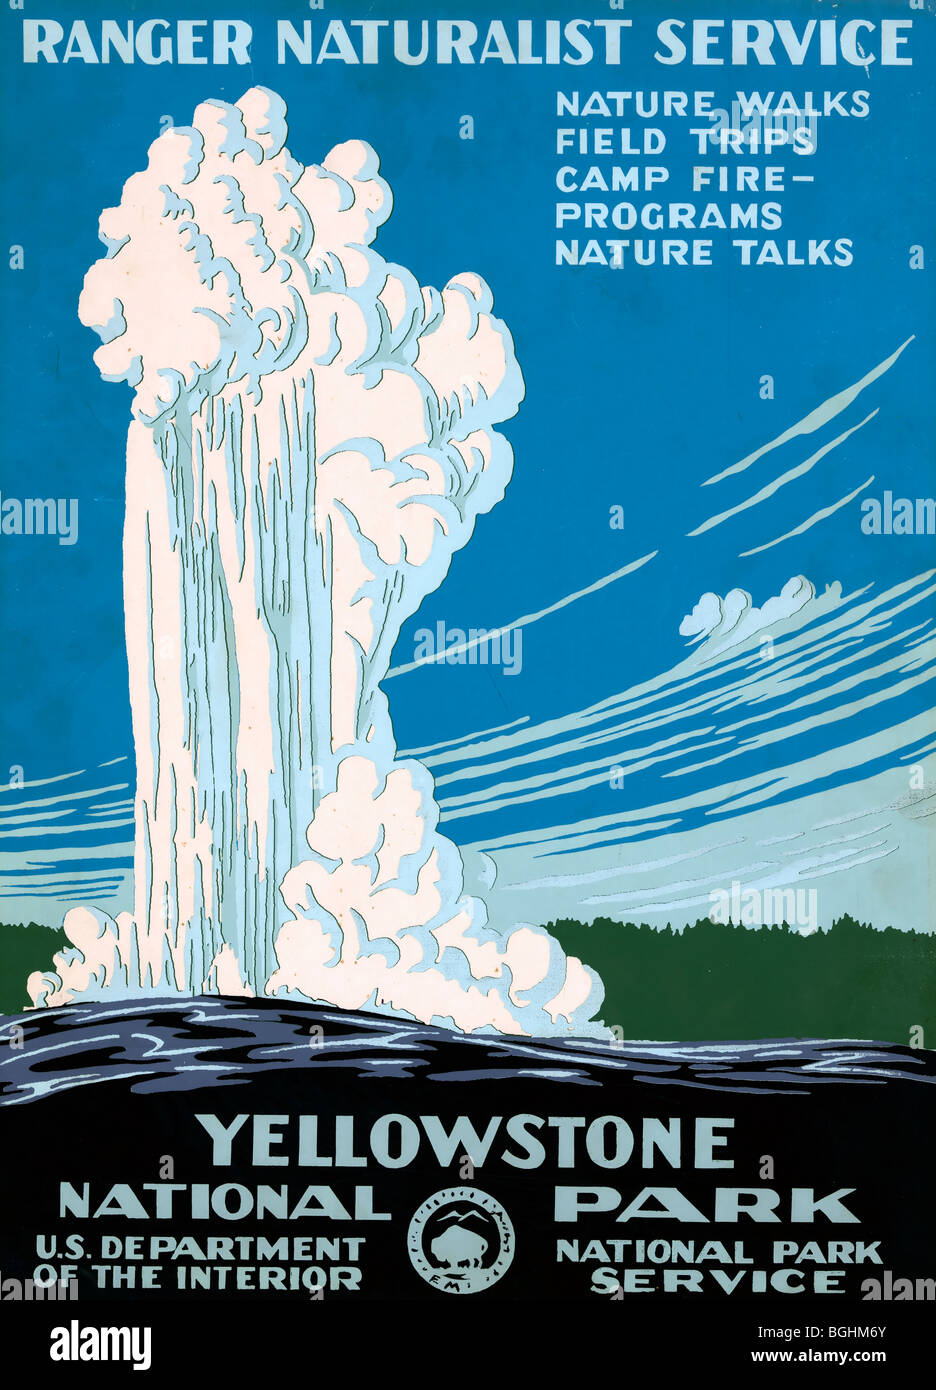 Yellowstone National Park, Ranger Naturalist Service - WPA Poster shows Old Faithful erupting at Yellowstone National Park Stock Photo